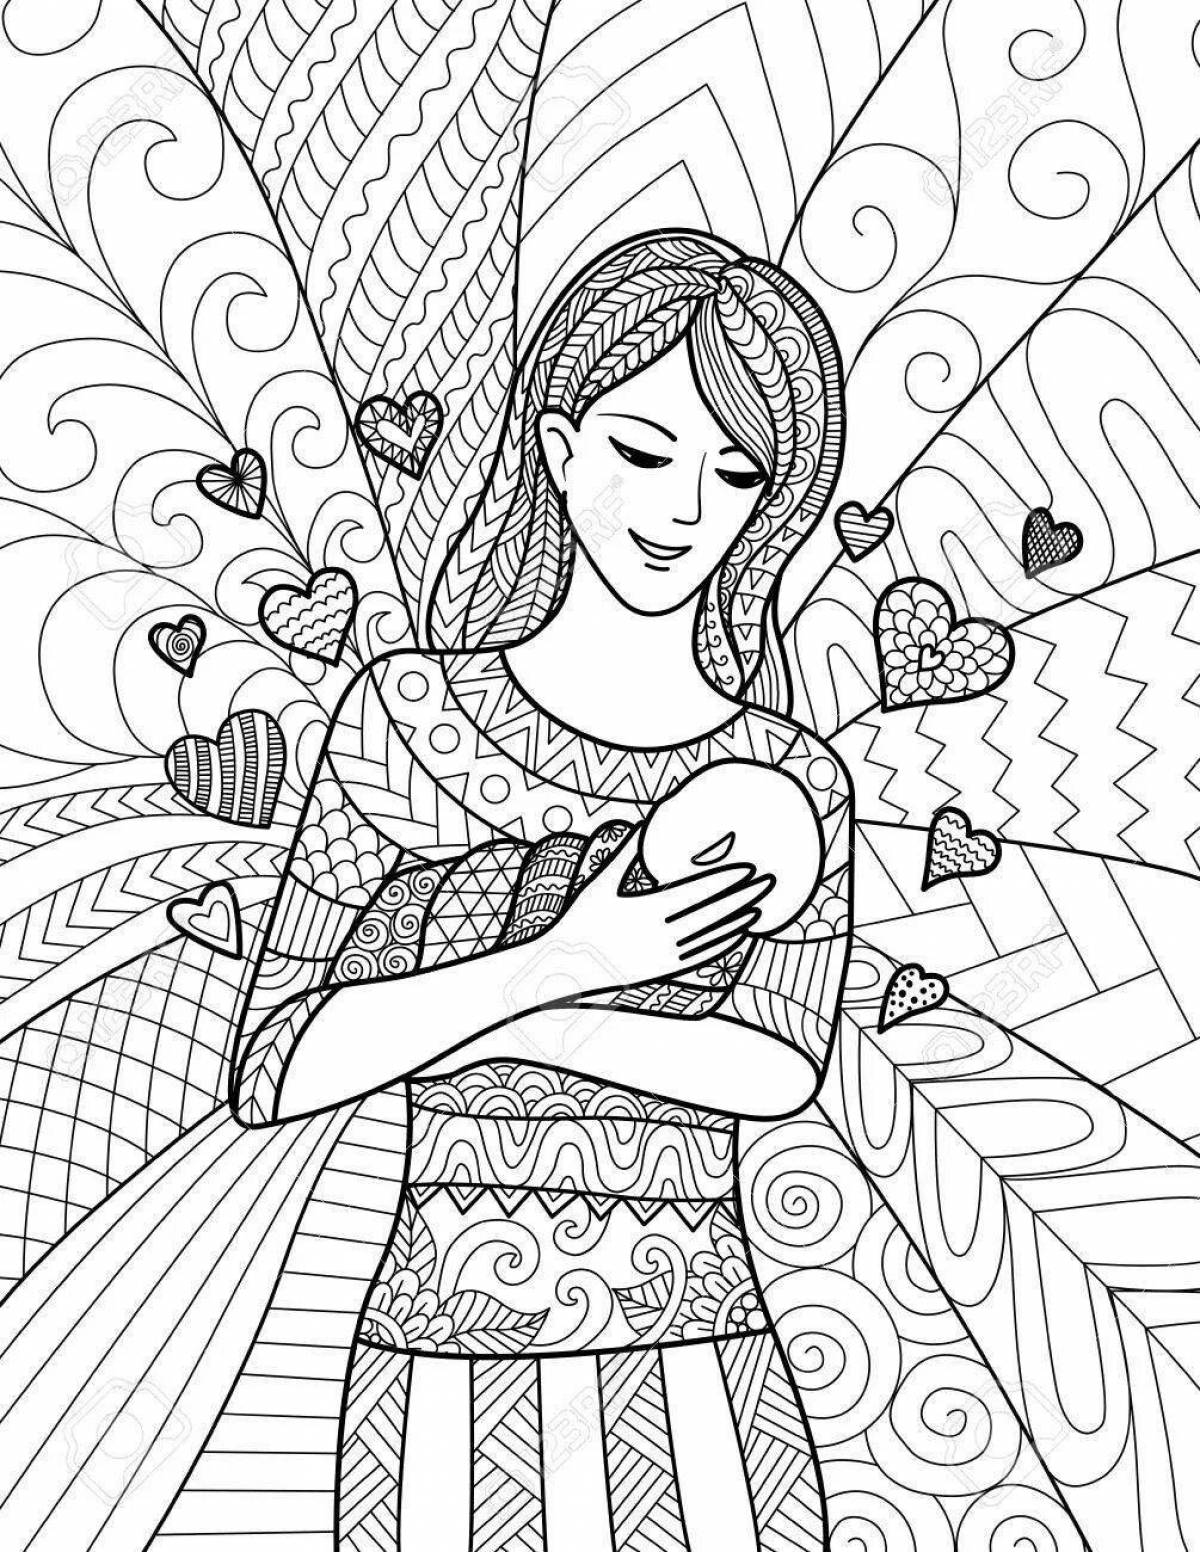 Inspirational maternity coloring book